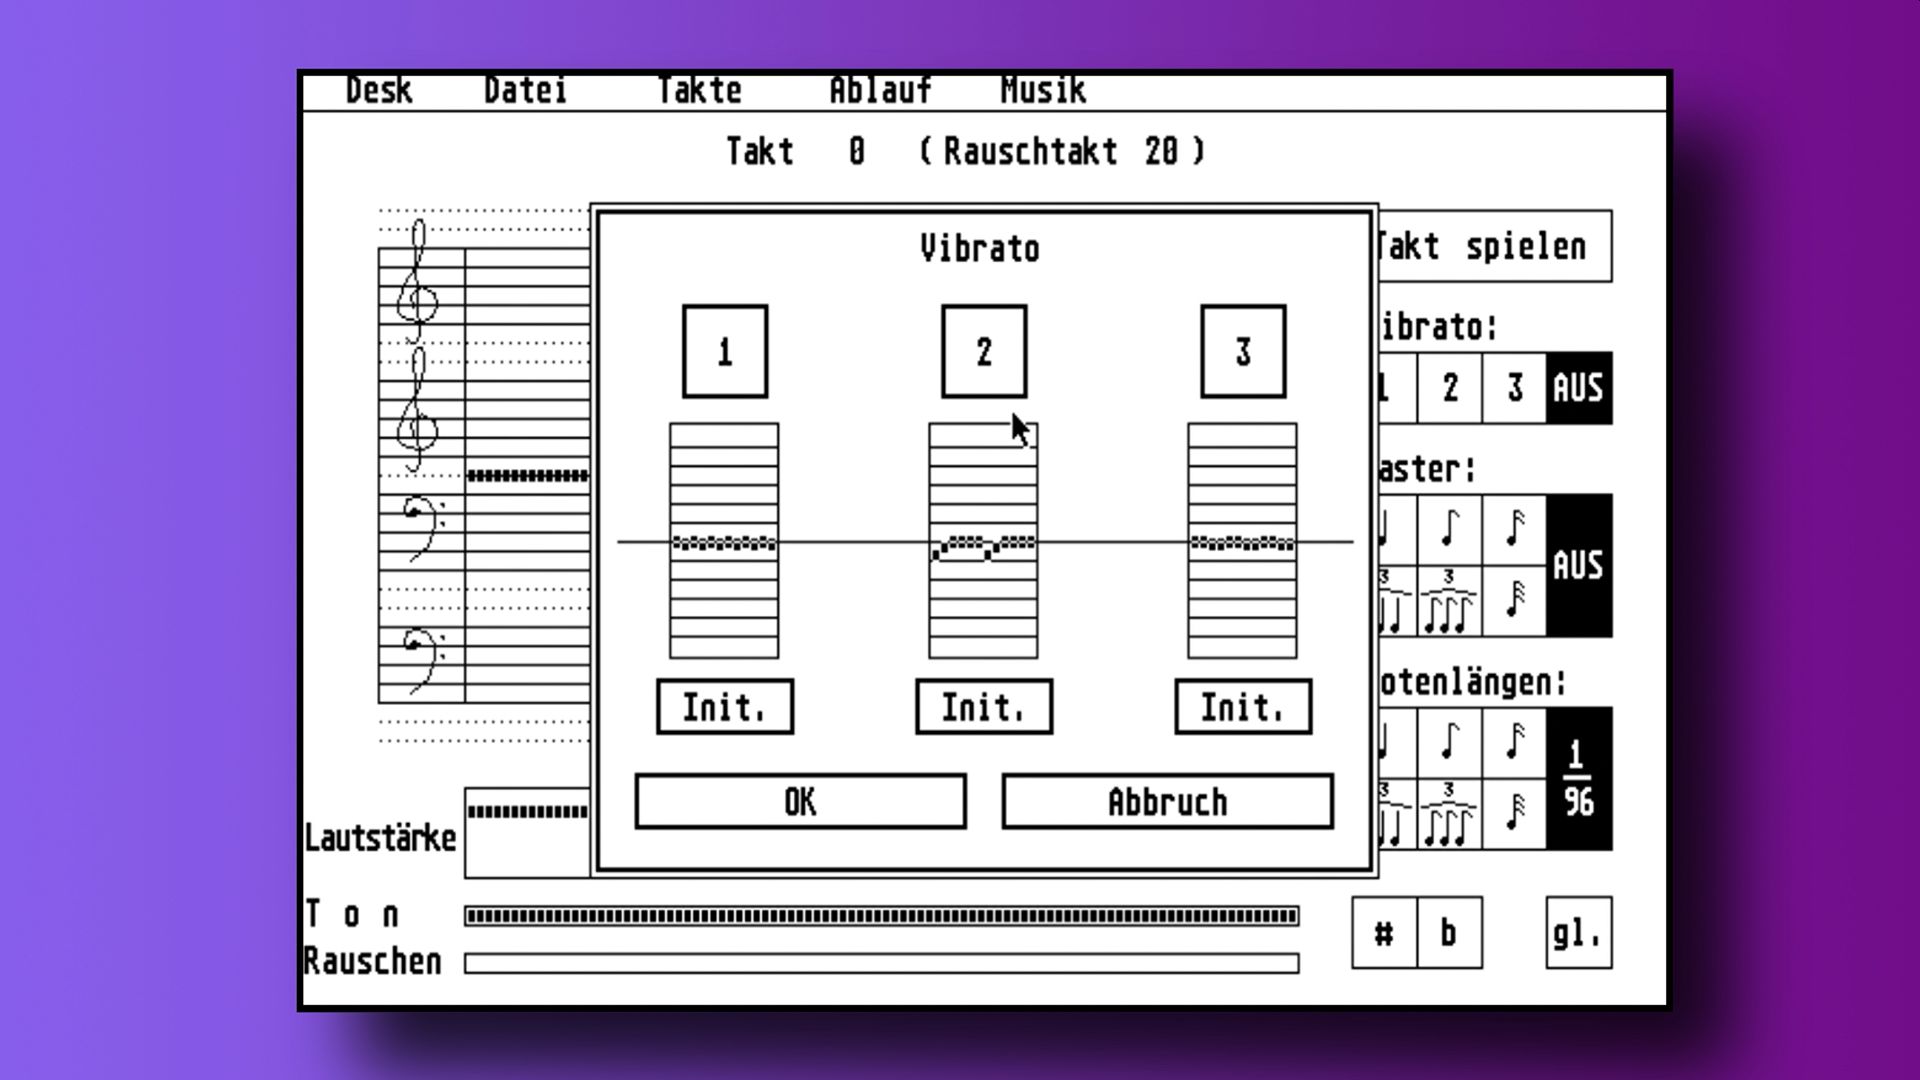 Musik Editor was Eckhart's first program on the ST, created with his own version of an assembler. All the music in his future demos and games would be made using this tool.